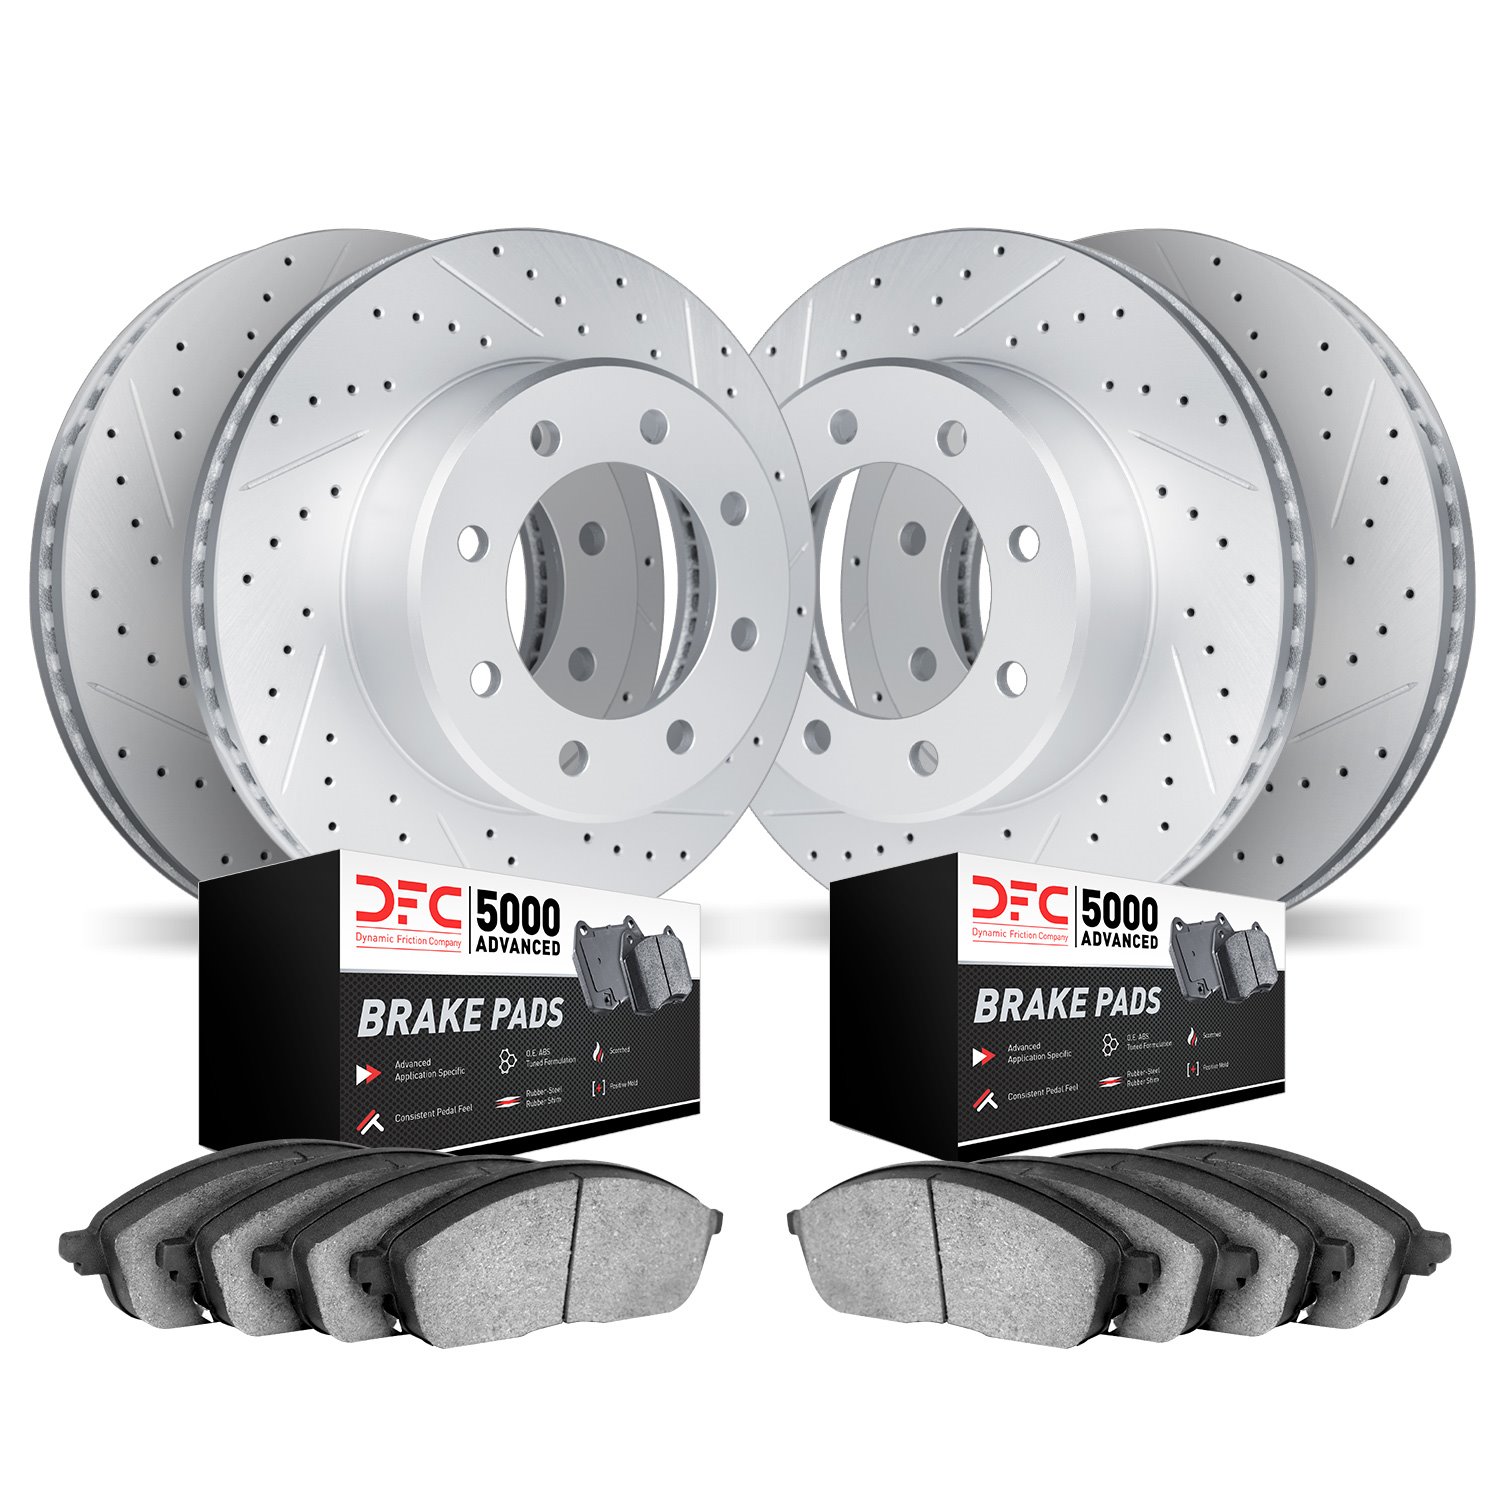 2504-54242 Geoperformance Drilled/Slotted Rotors w/5000 Advanced Brake Pads Kit, 1999-1999 Ford/Lincoln/Mercury/Mazda, Position: